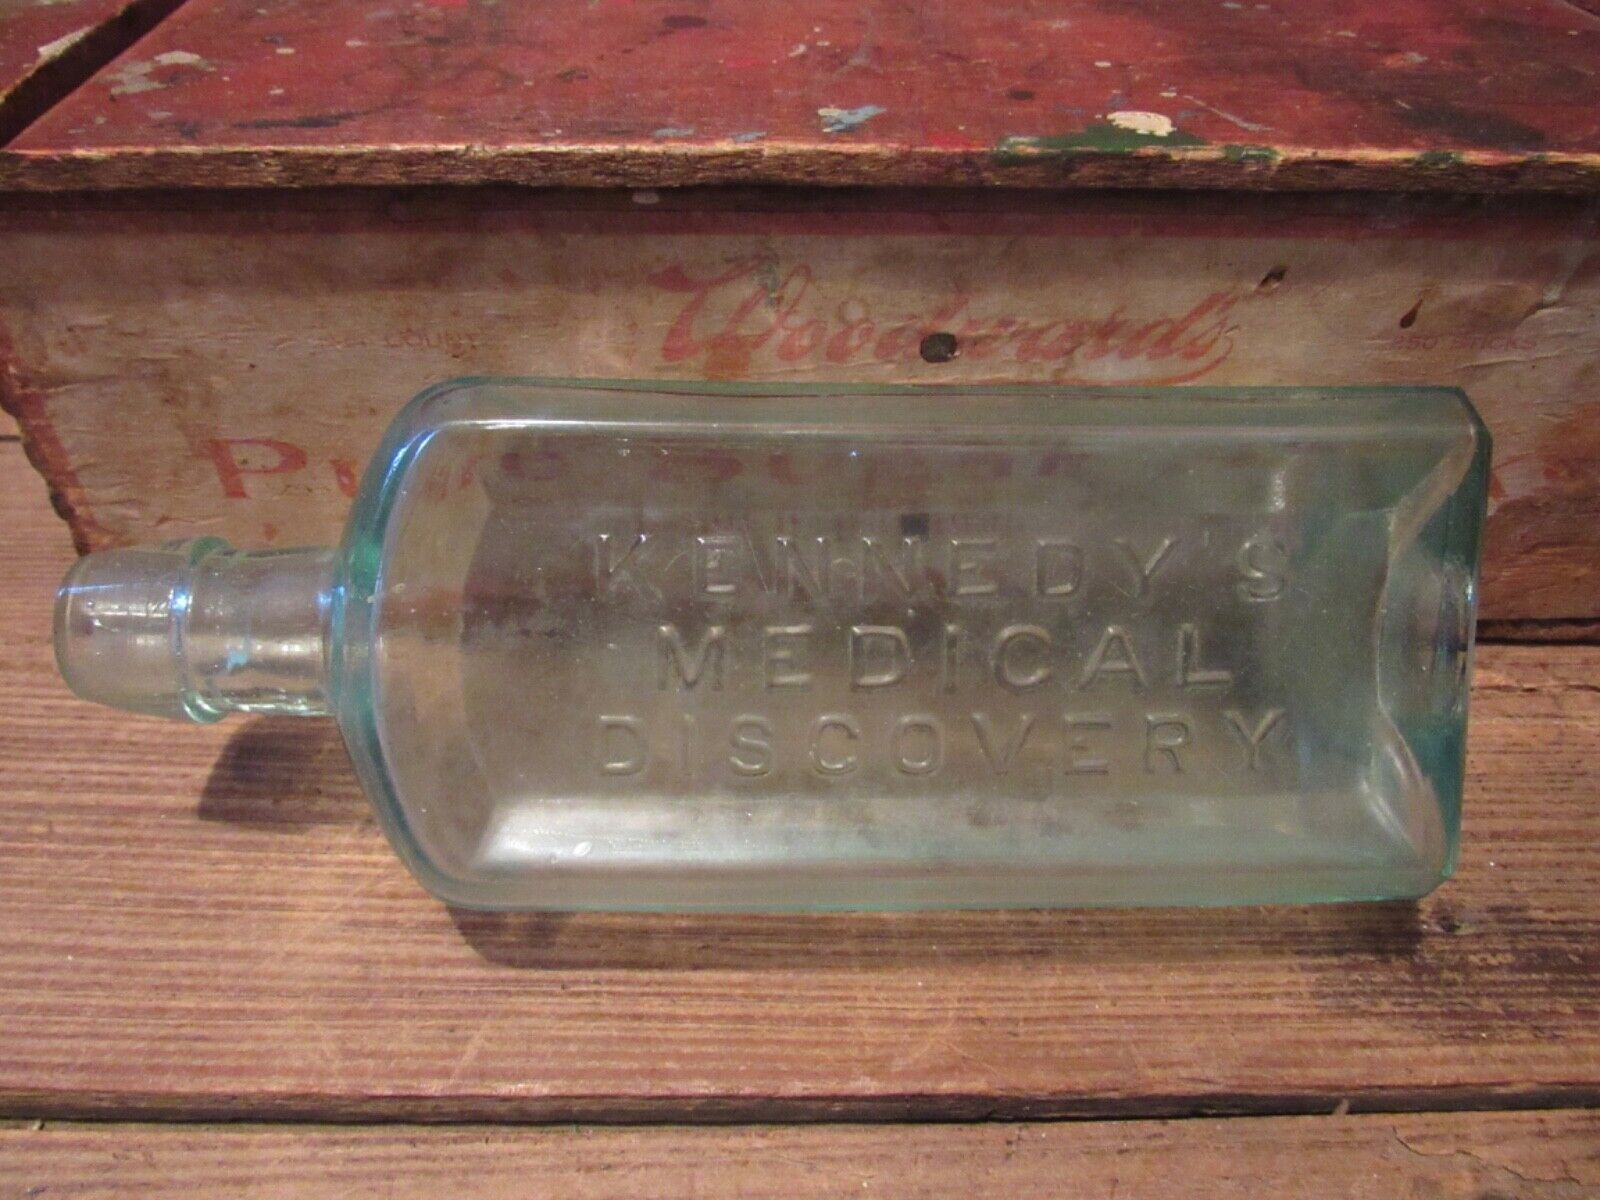 OPEN PONTIL DR.KENNEDY'S MEDICAL DISCOVERY ROXBURY,MASS 1800s CRUDE MED BOTTLE